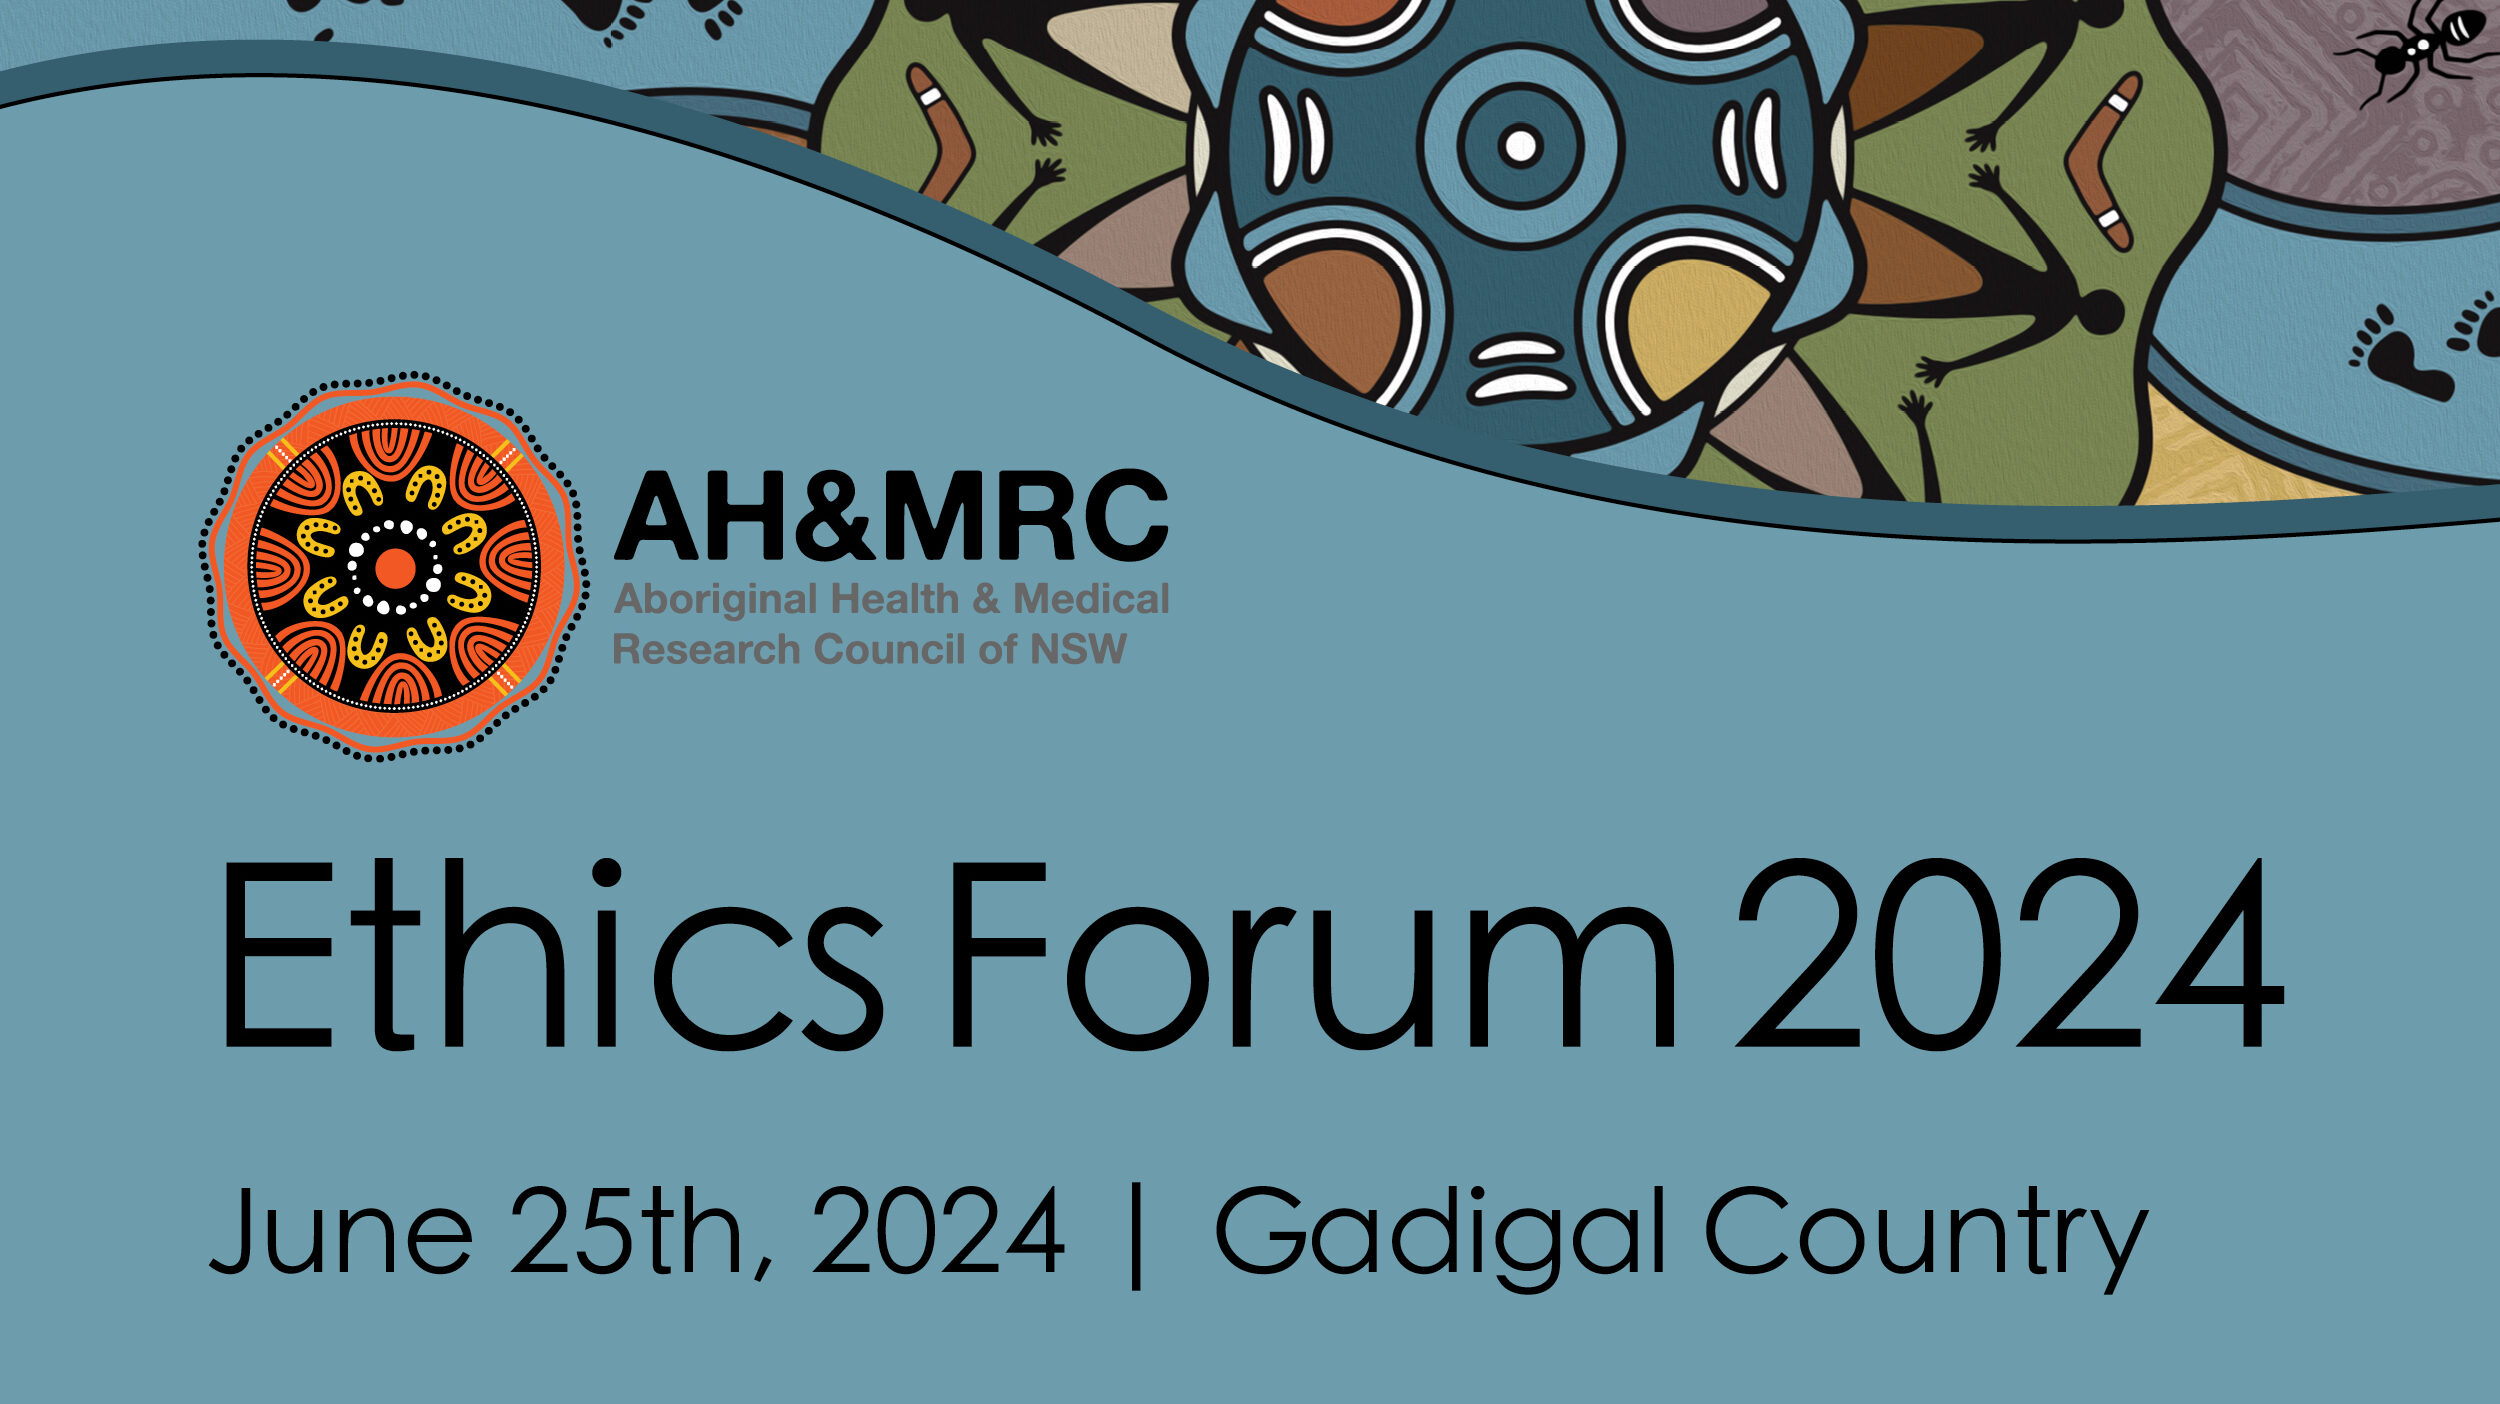 AH&MRC Ethics Committee announces second inaugural Forum